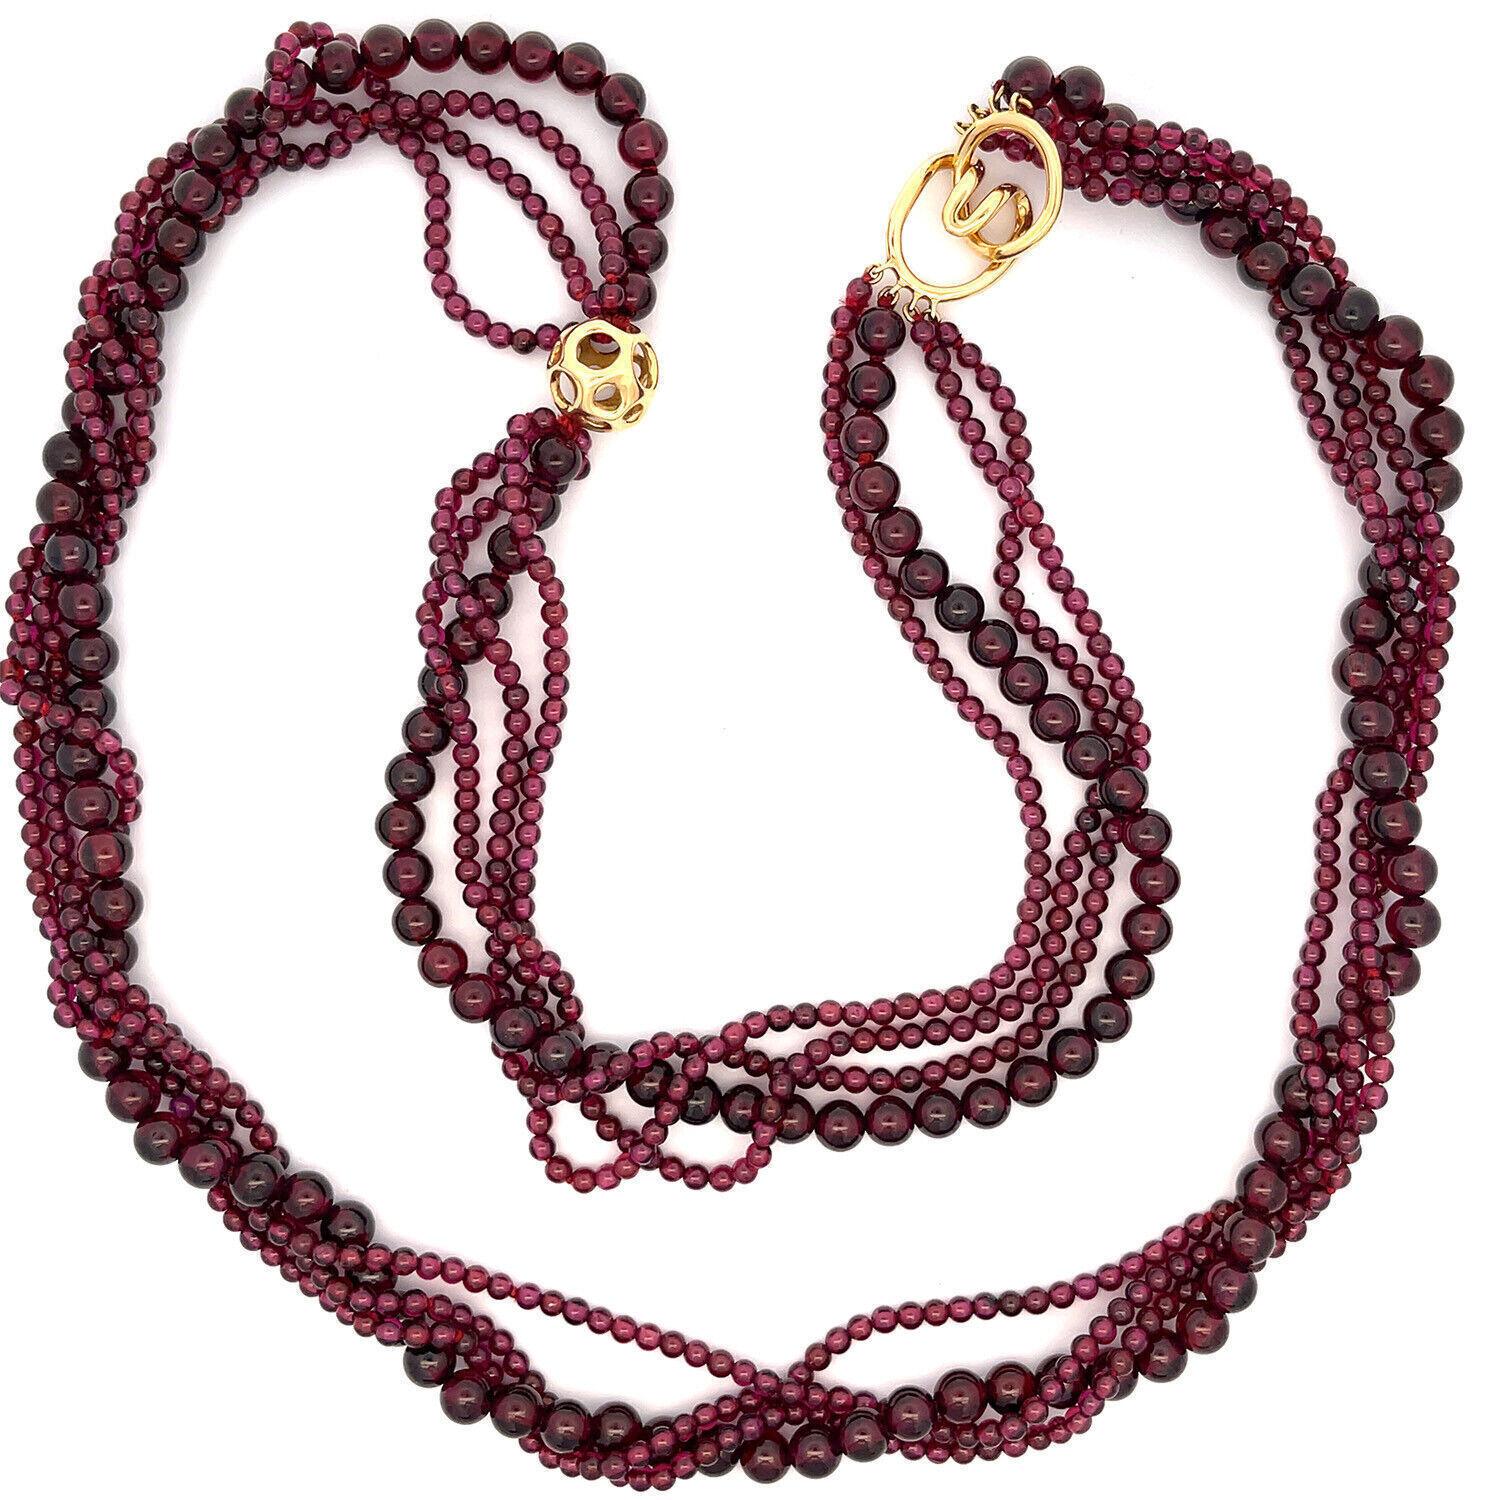 From Tiffany & Co. by designer Angela Cummings, this long elegant necklace has 4 strands garnet beads, 3 strands small beads, the 4th strand has larger beads. It is accented with a 13mm open style gold ball and it secure with a ring and hook clasp